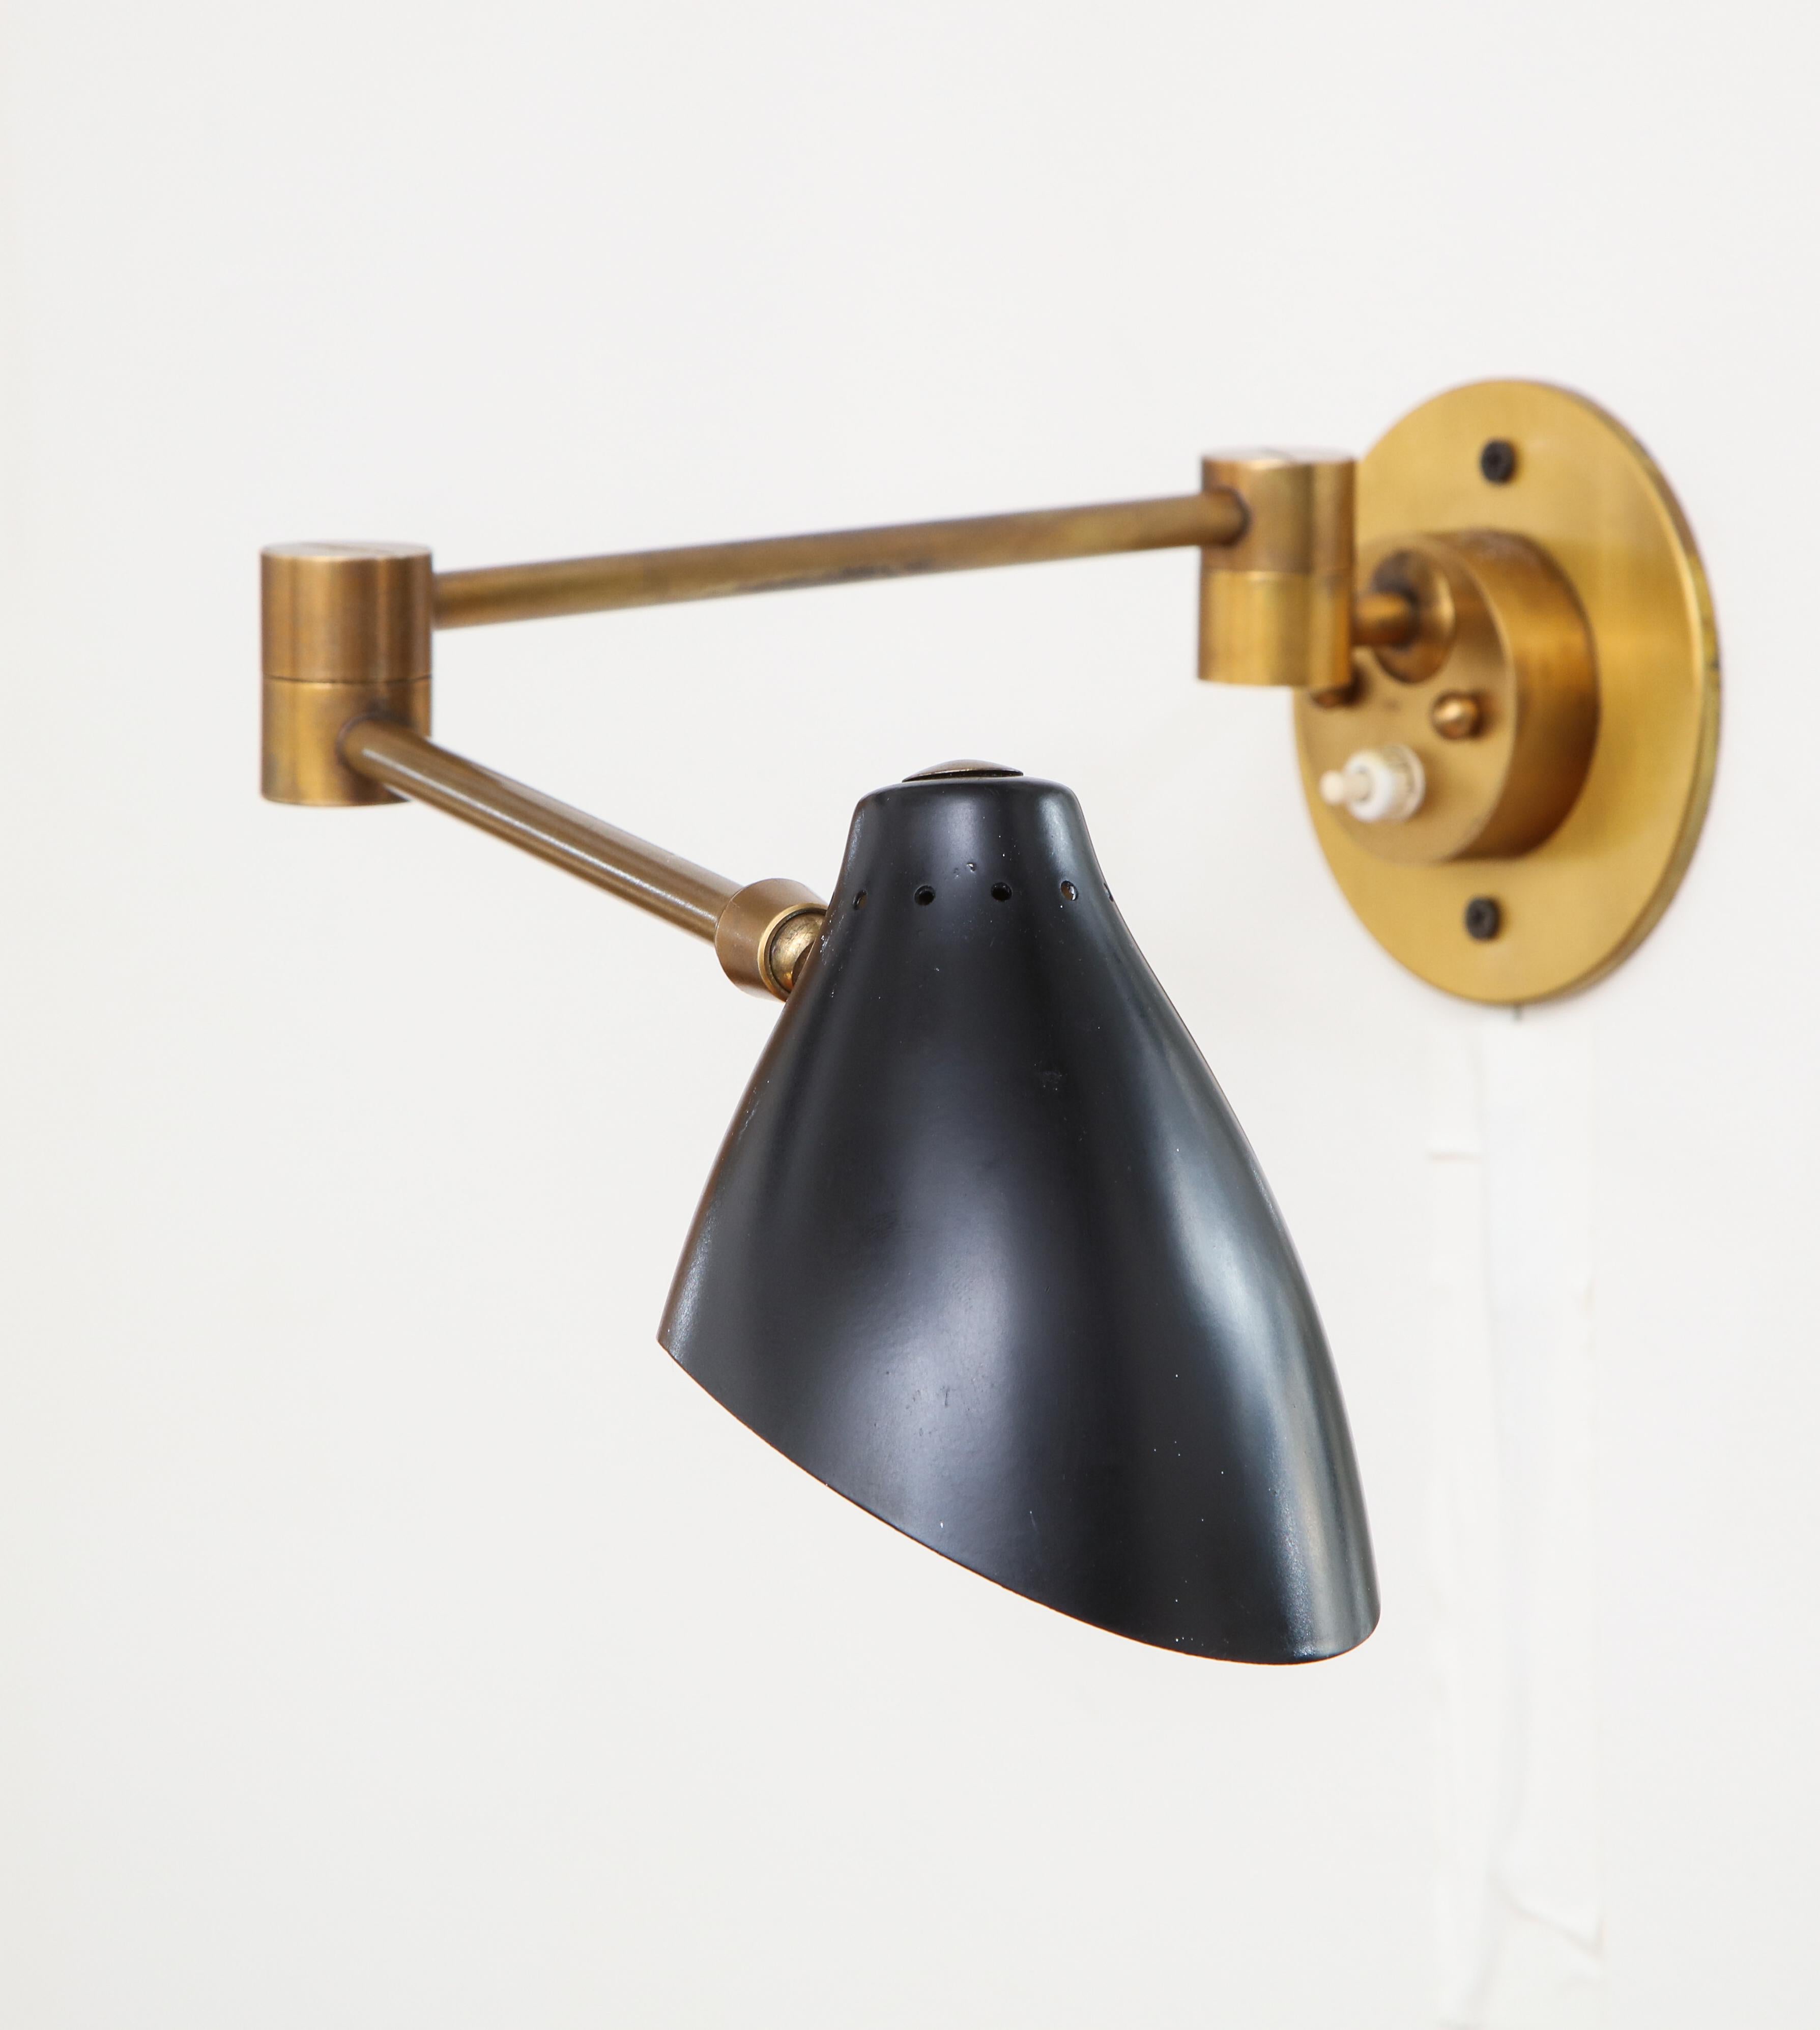 Angelo Lelii for Arredoluce rare pair of articulating sconces with pivoting lacquer aluminum shades on triple joint structure in brass adjustable to various positions. These sconces have a simple and elegant design and are made with expert